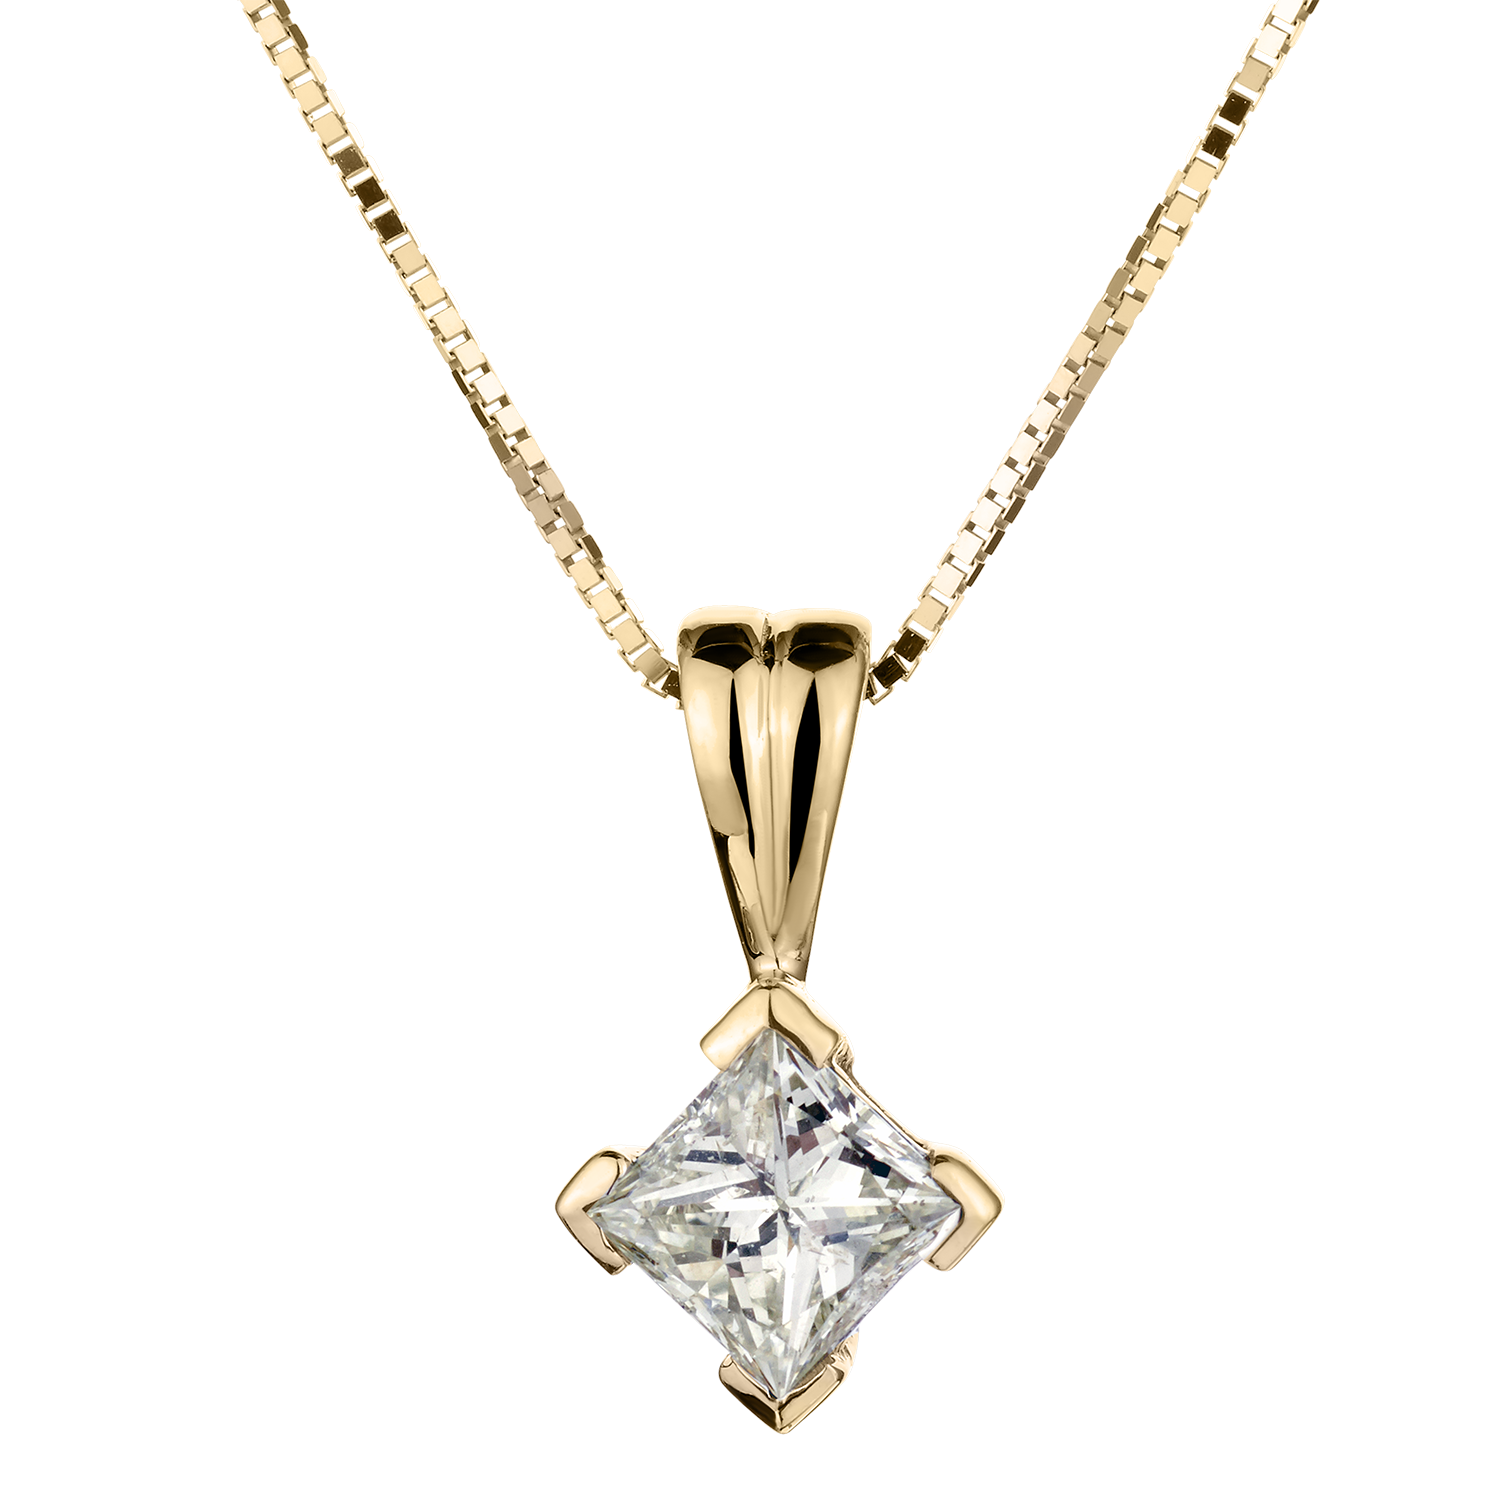 .22 Carat Diamond Canadian Princess Pendant,  10kt White And Yellow Gold. Necklaces and Pendants. Griffin Jewellery Designs.